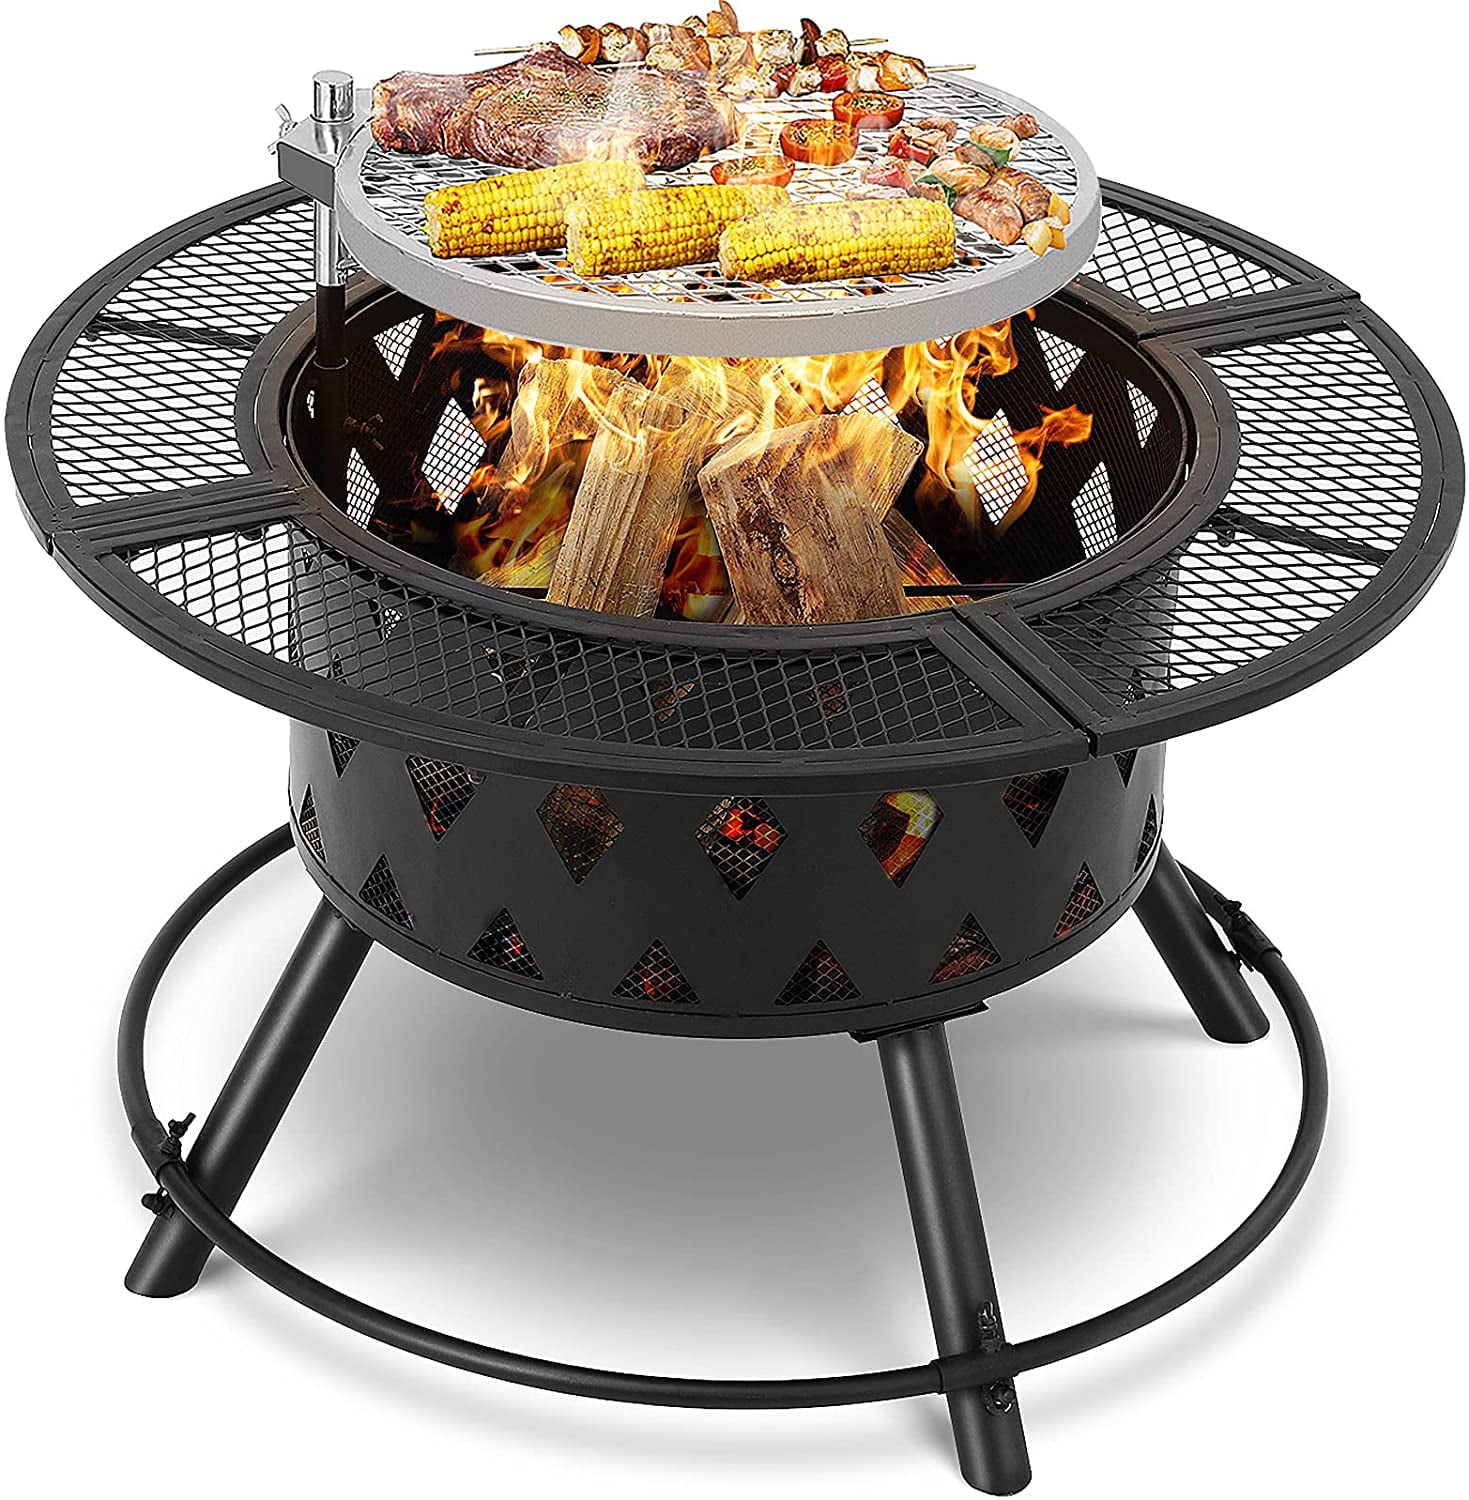 Gartio 36 Wood Burning Fire Pit Bowl, Fire Pit Wood Grill